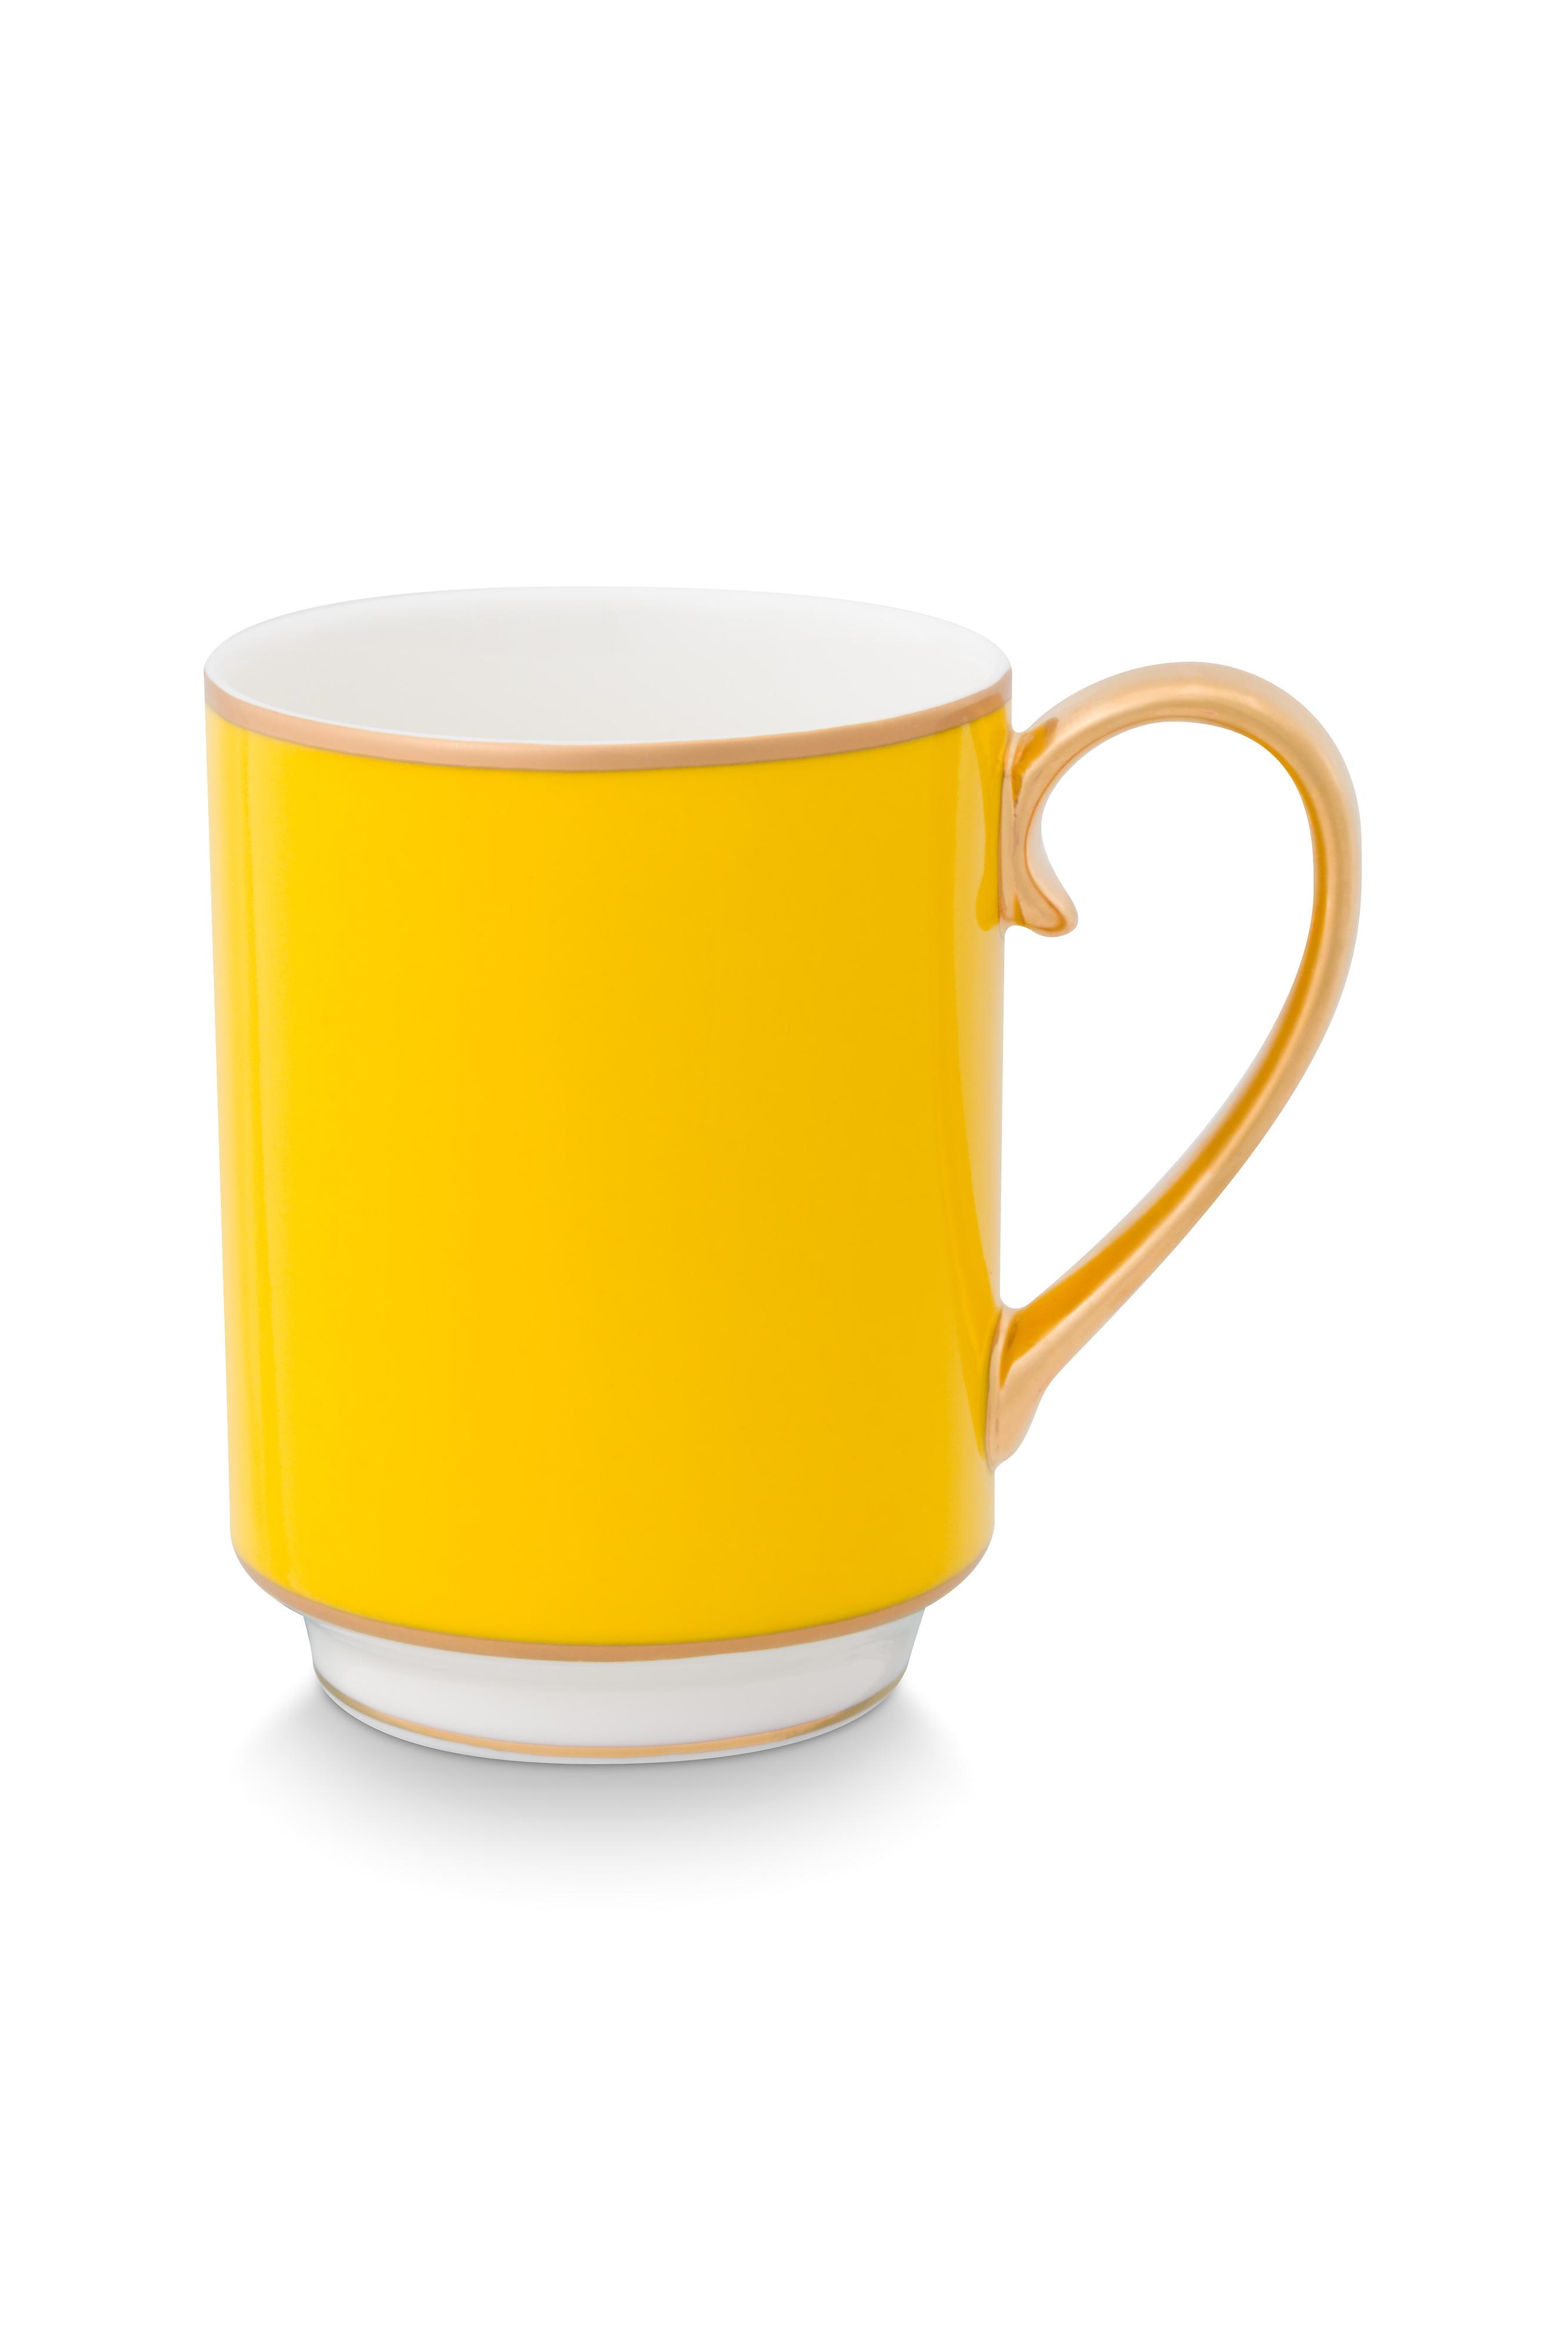 Mug Large With Ear Pip Chique Gold-yellow 350ml Gift